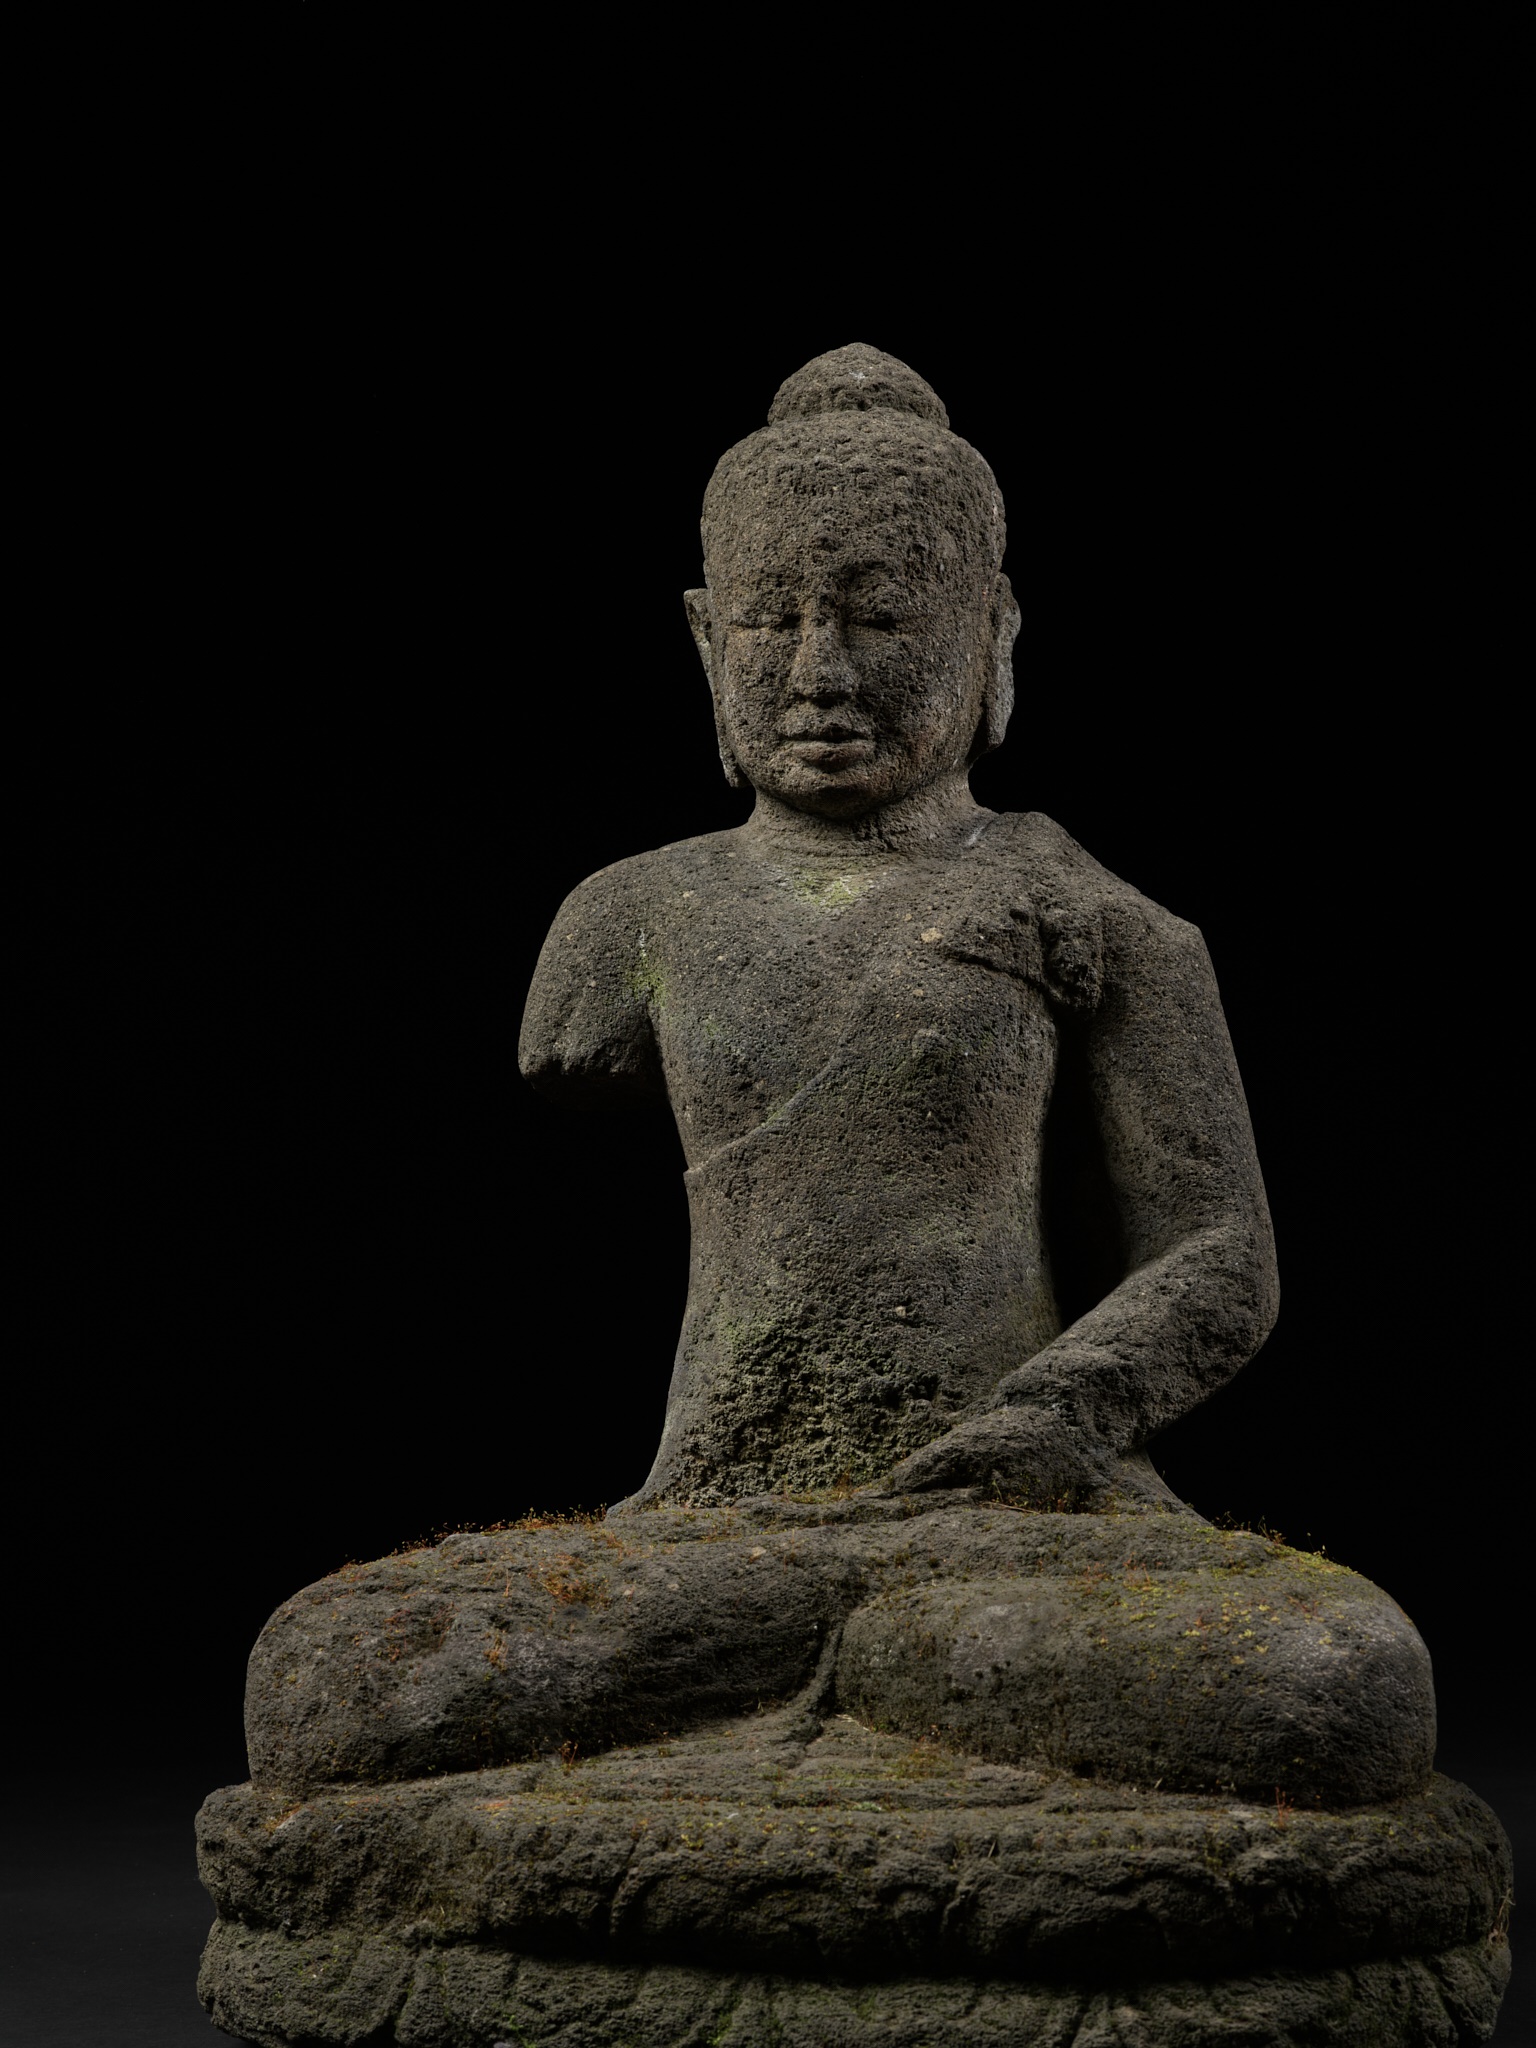 A VOLCANIC STONE FIGURE OF BUDDHA, CENTRAL JAVA, INDONESIA, FIRST HALF OF THE 9TH CENTURY - Image 10 of 14